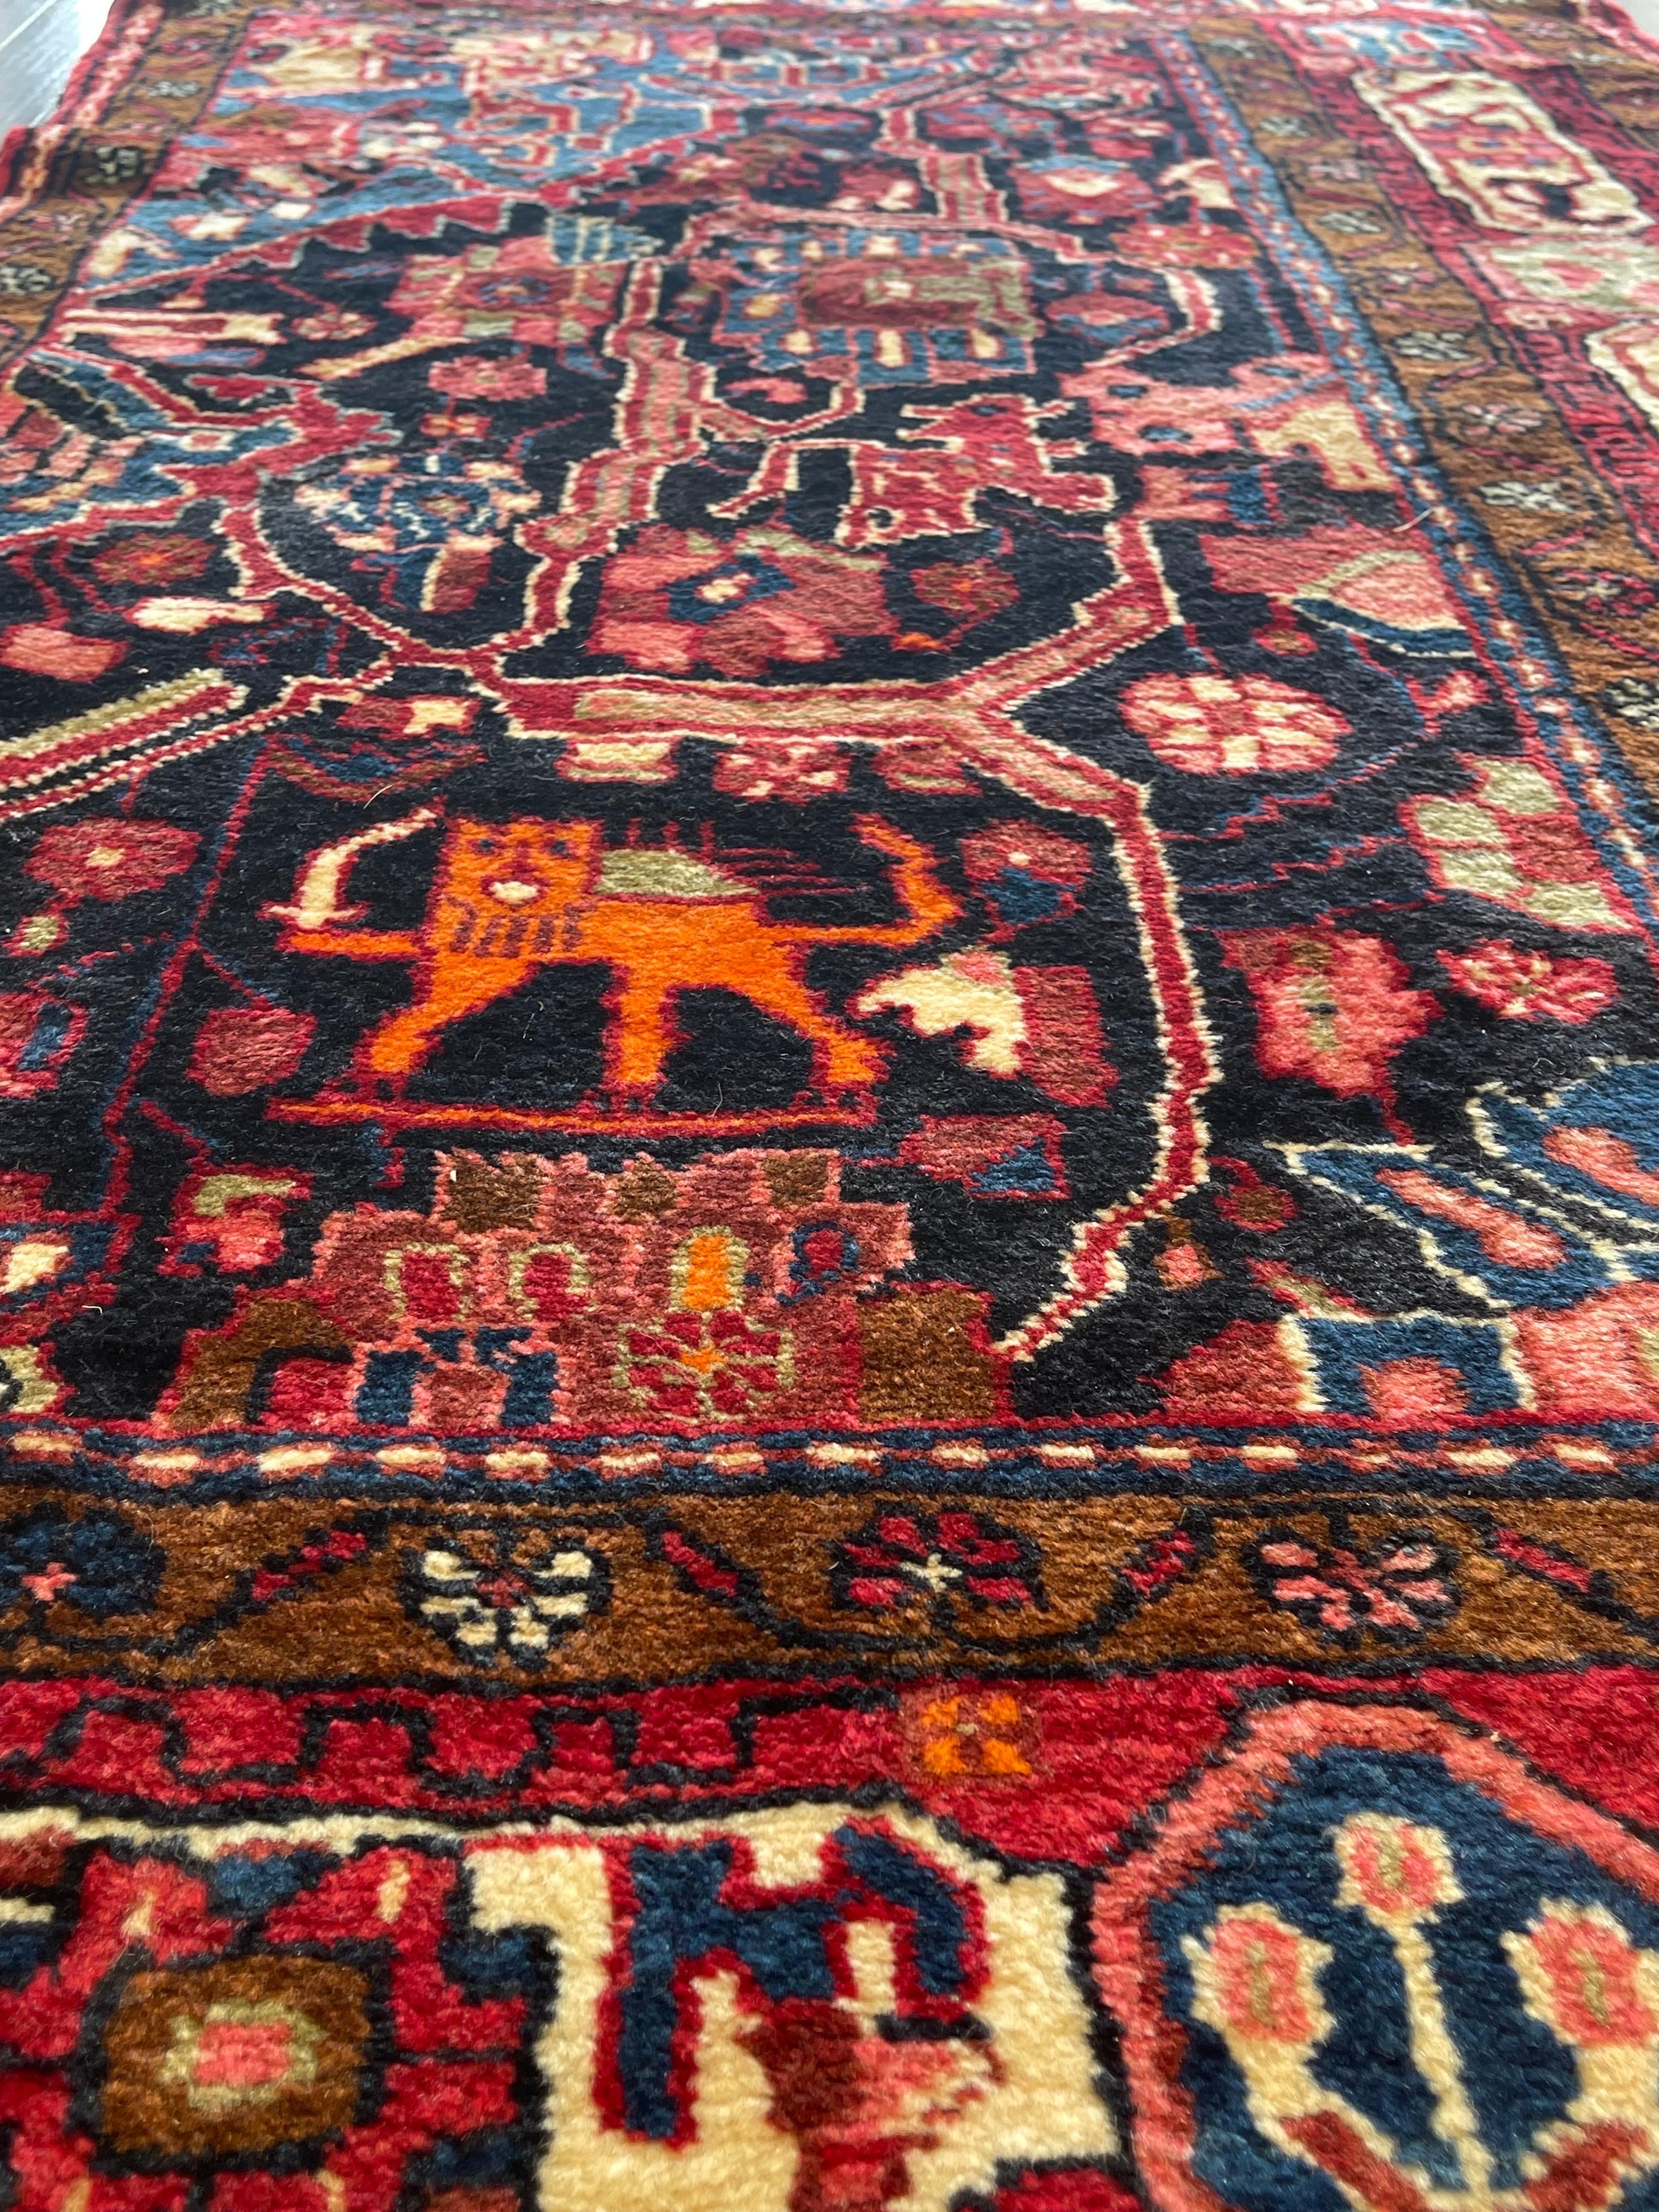 Vintage Persian Navahand Vagireh Sampler In Excellent Condition For Sale In Morton Grove, IL